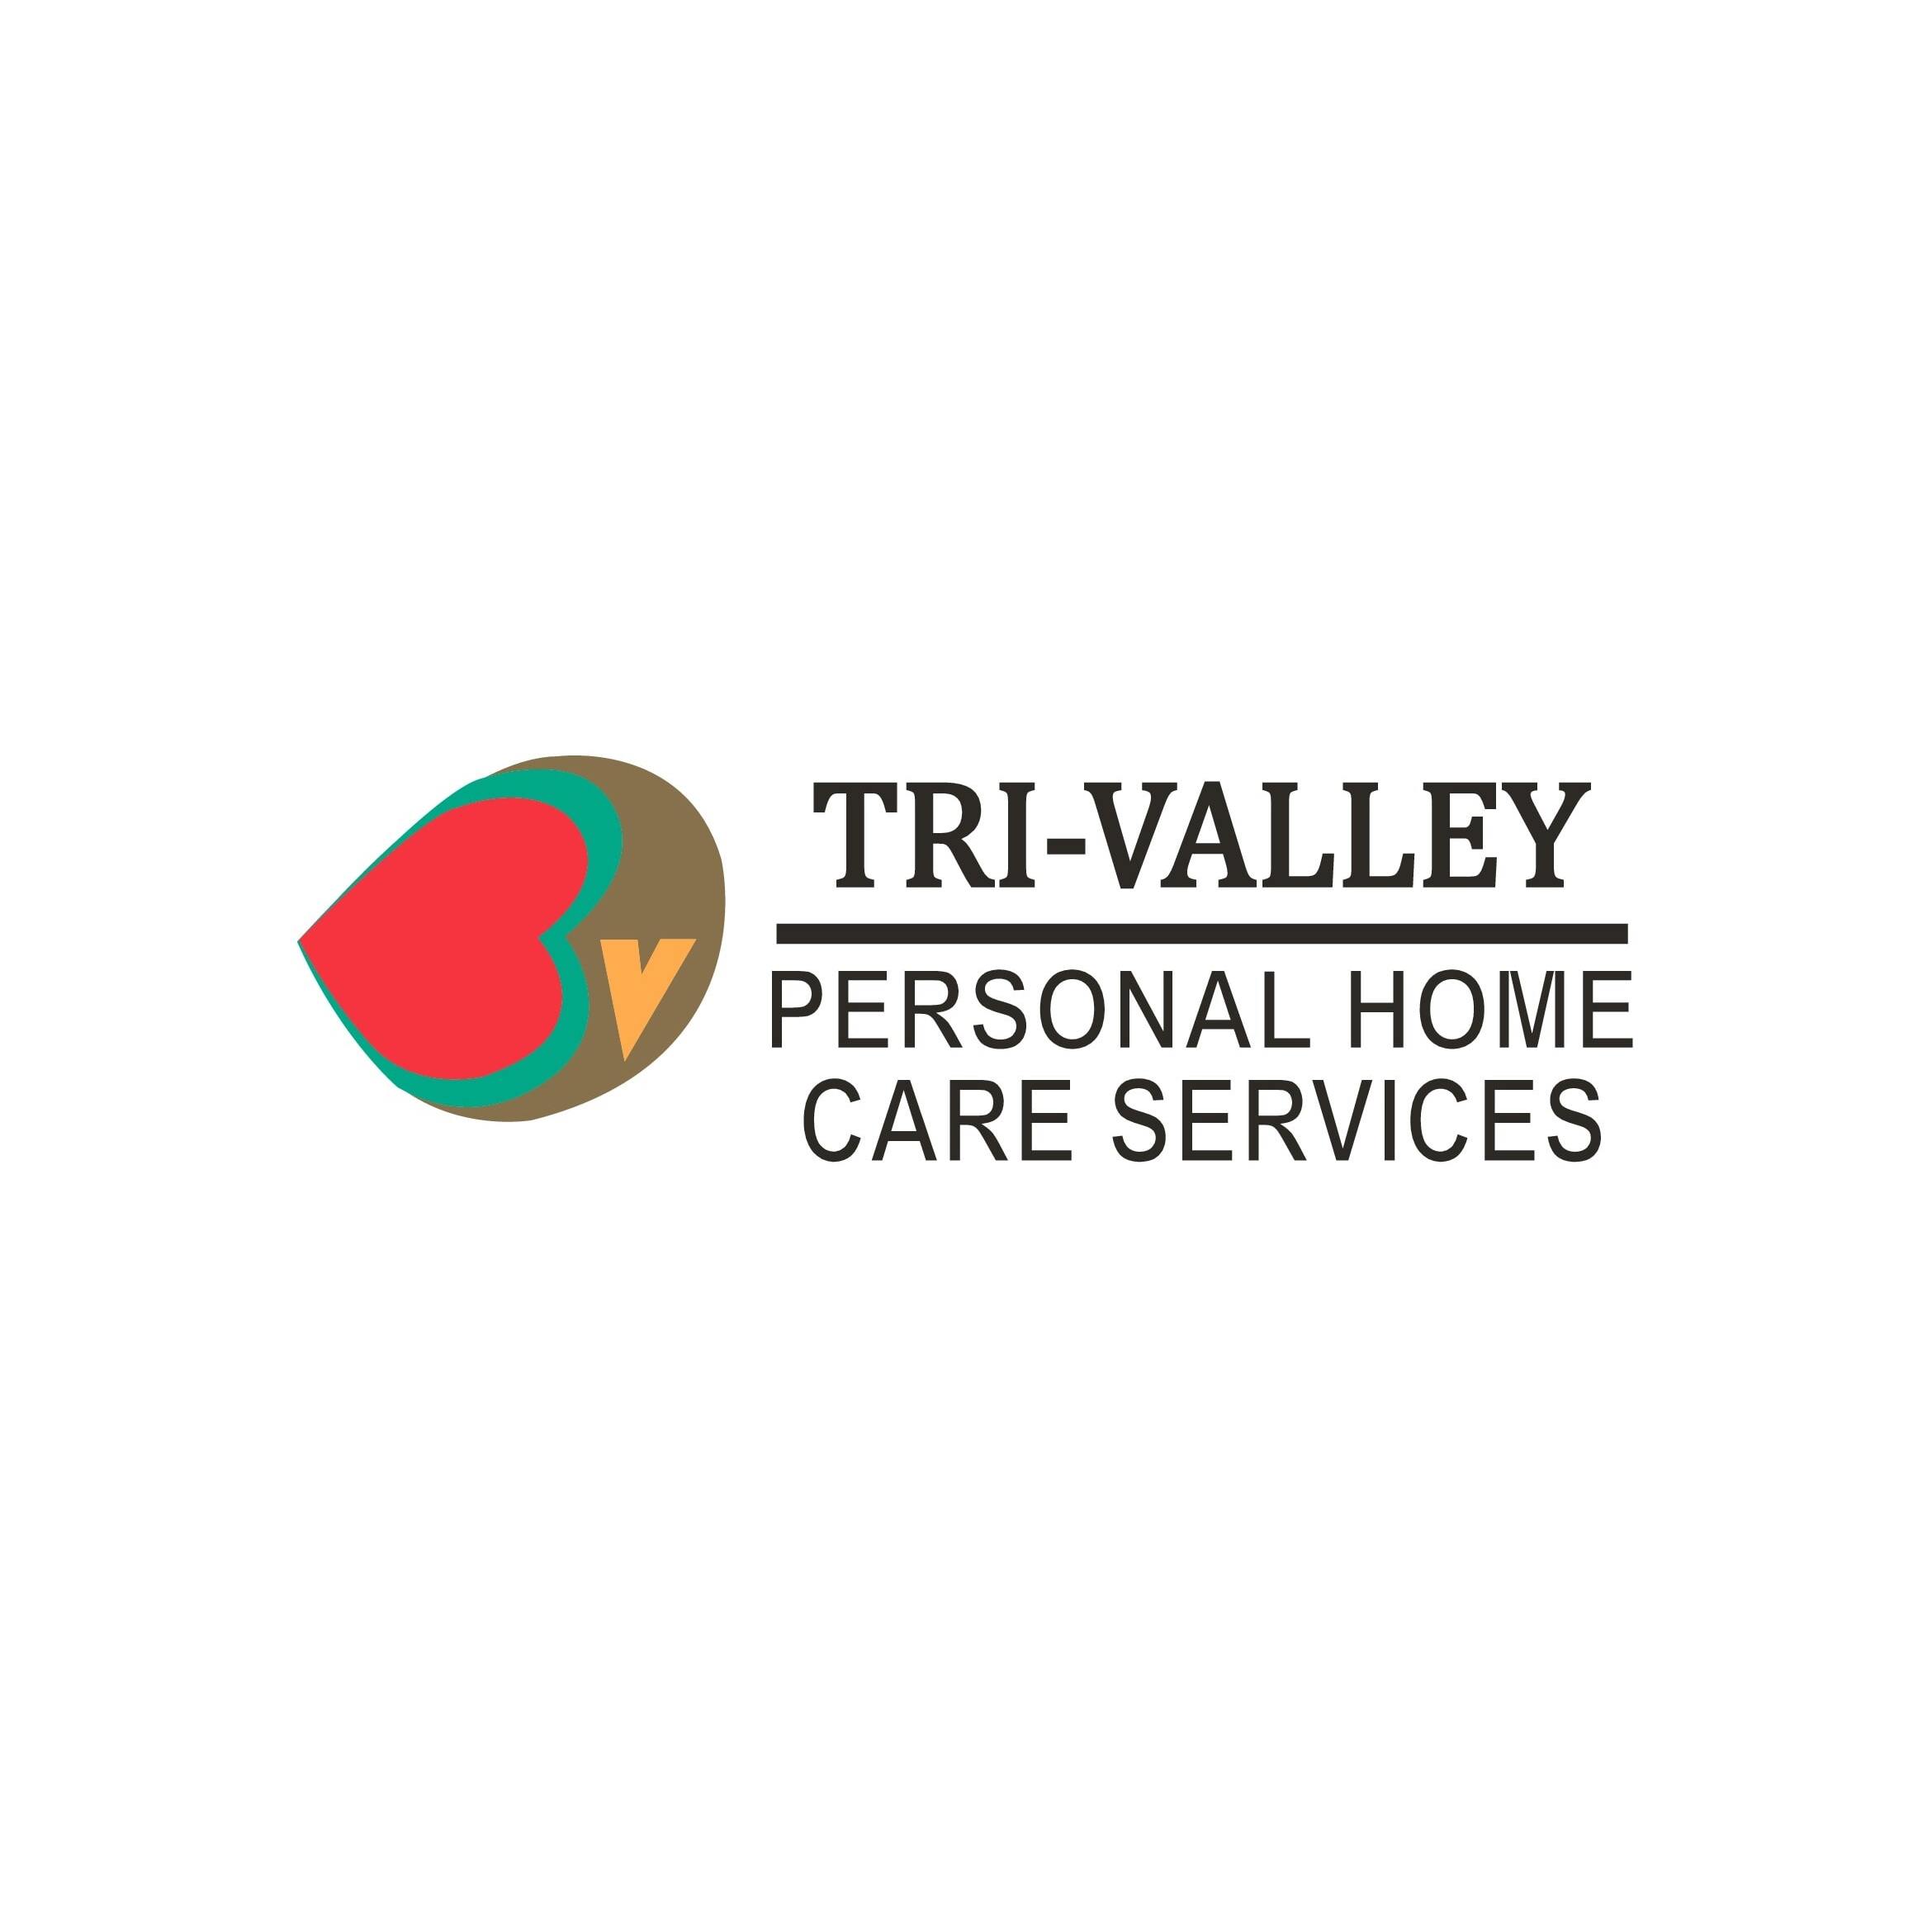 Tri-Valley Personal Home Care Services Logo